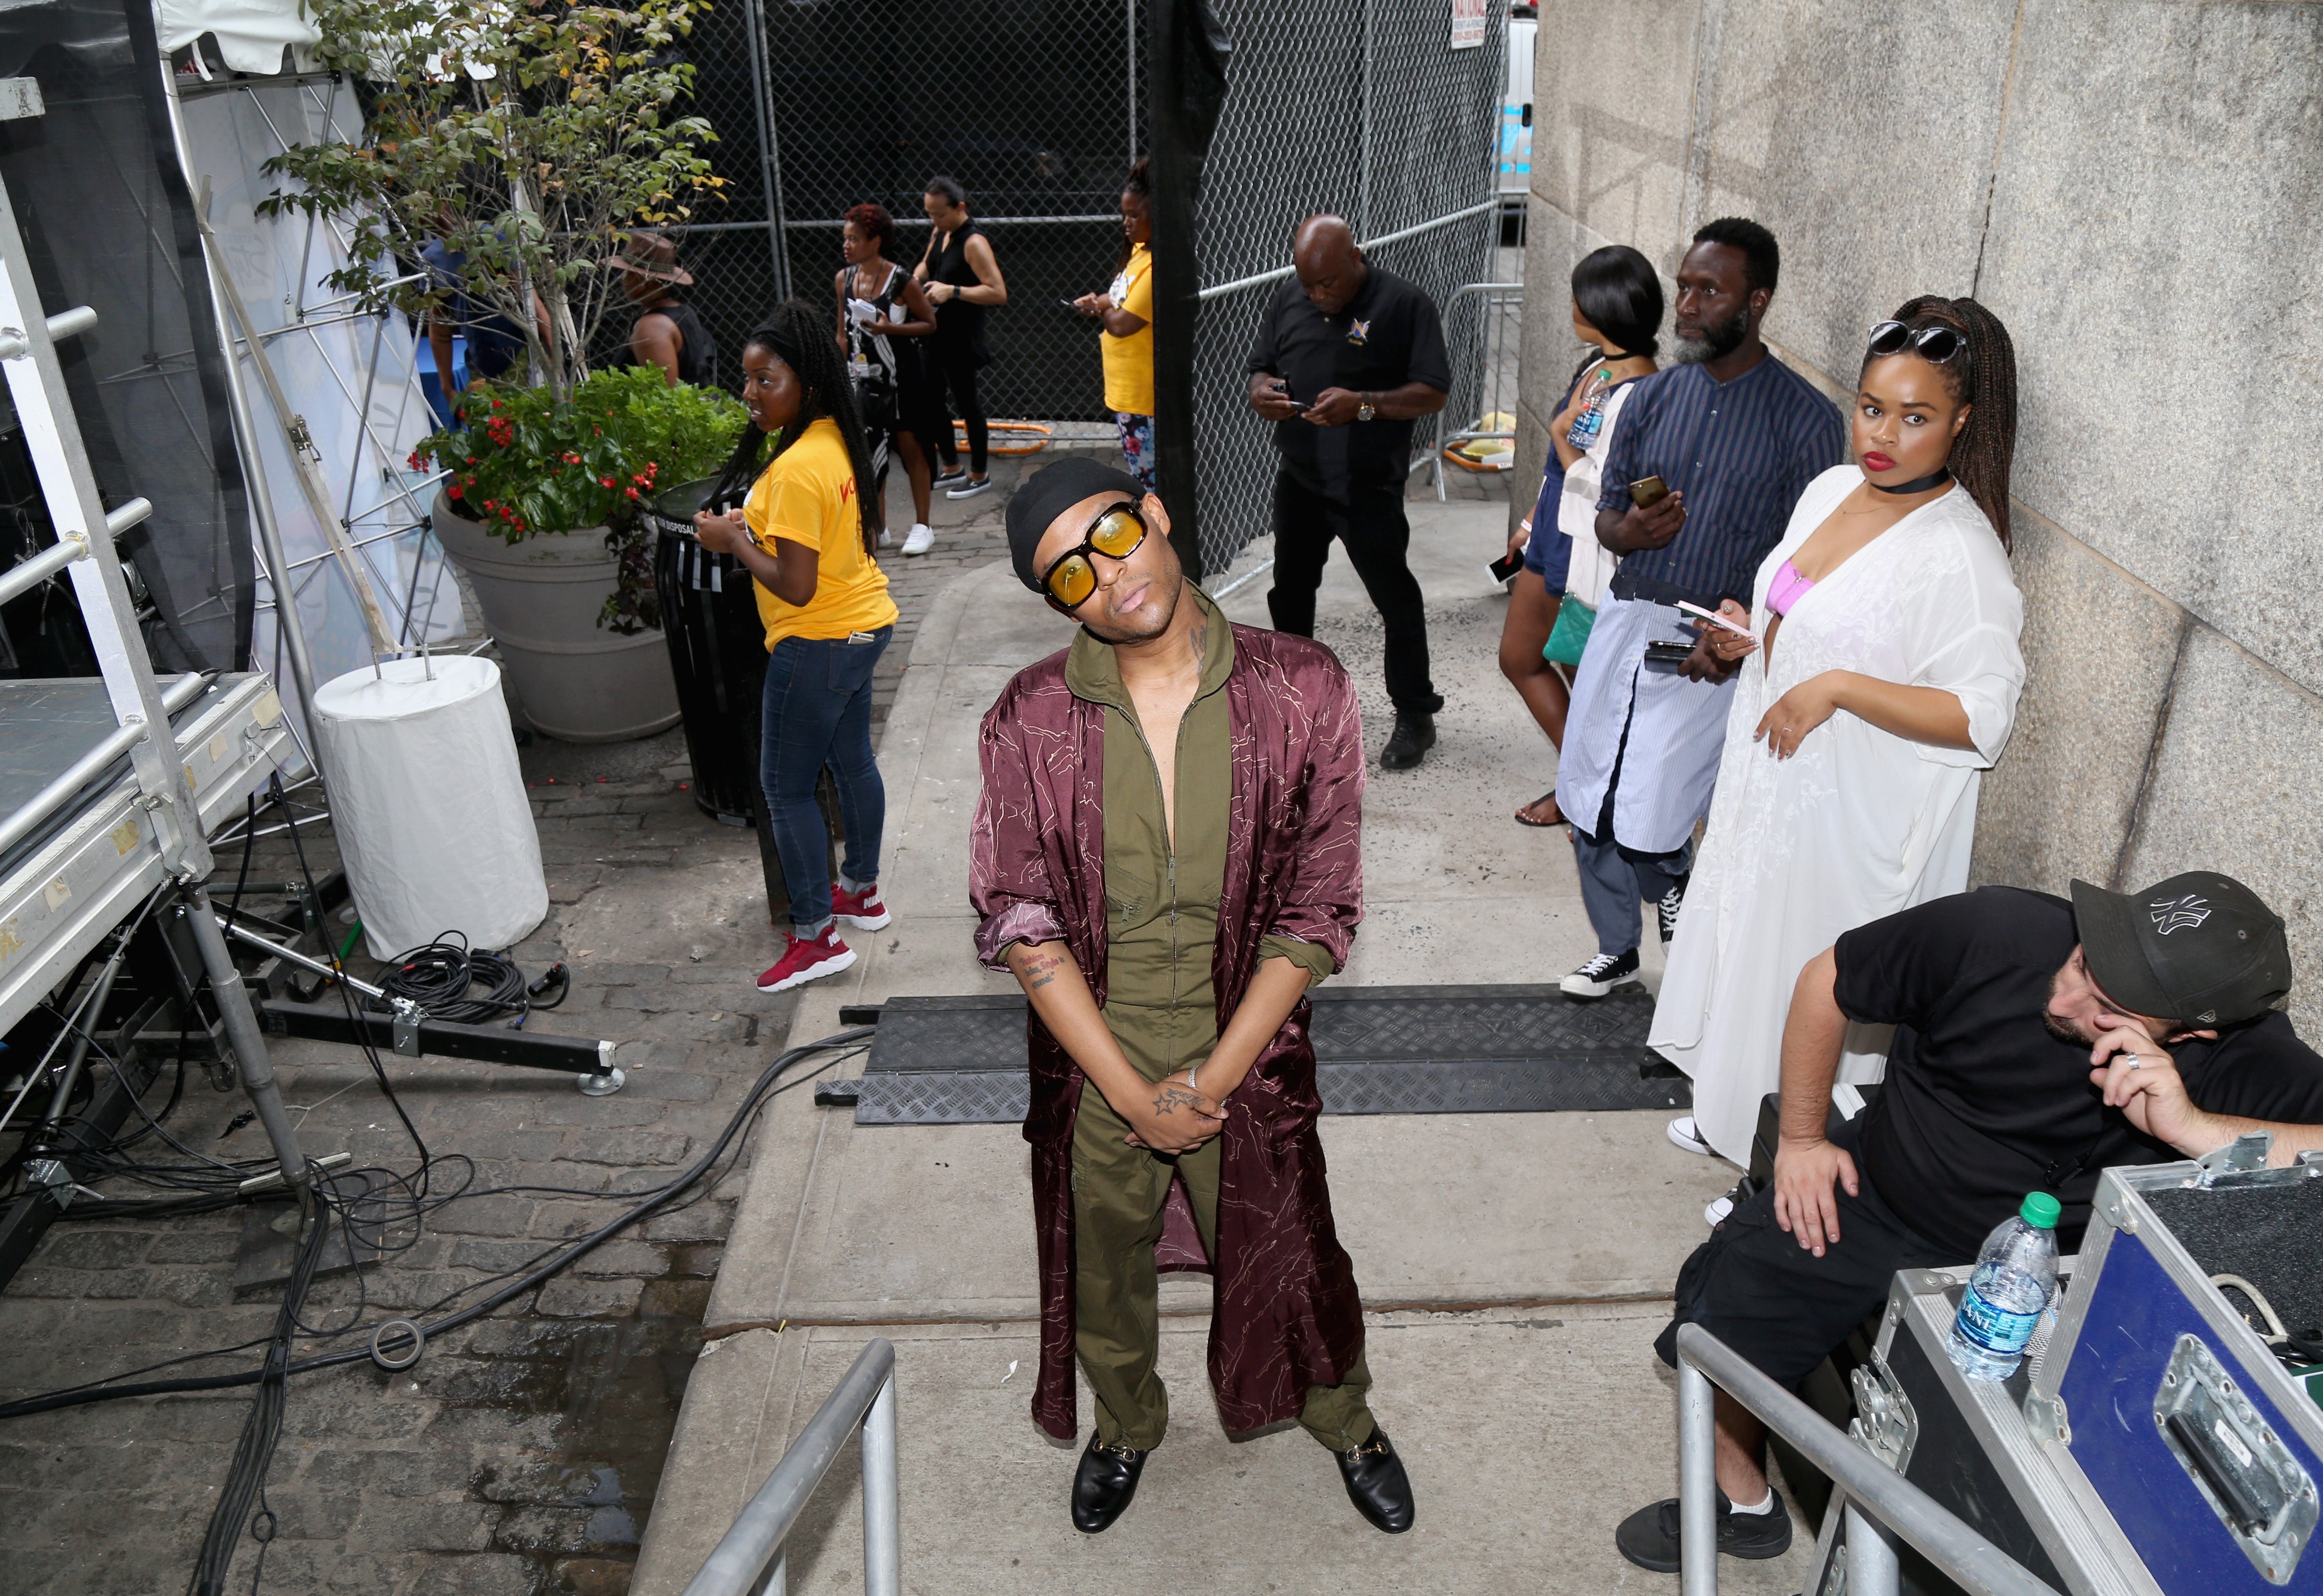 In Case You Missed It: On The Scene At the ESSENCE Street Style Block Party
